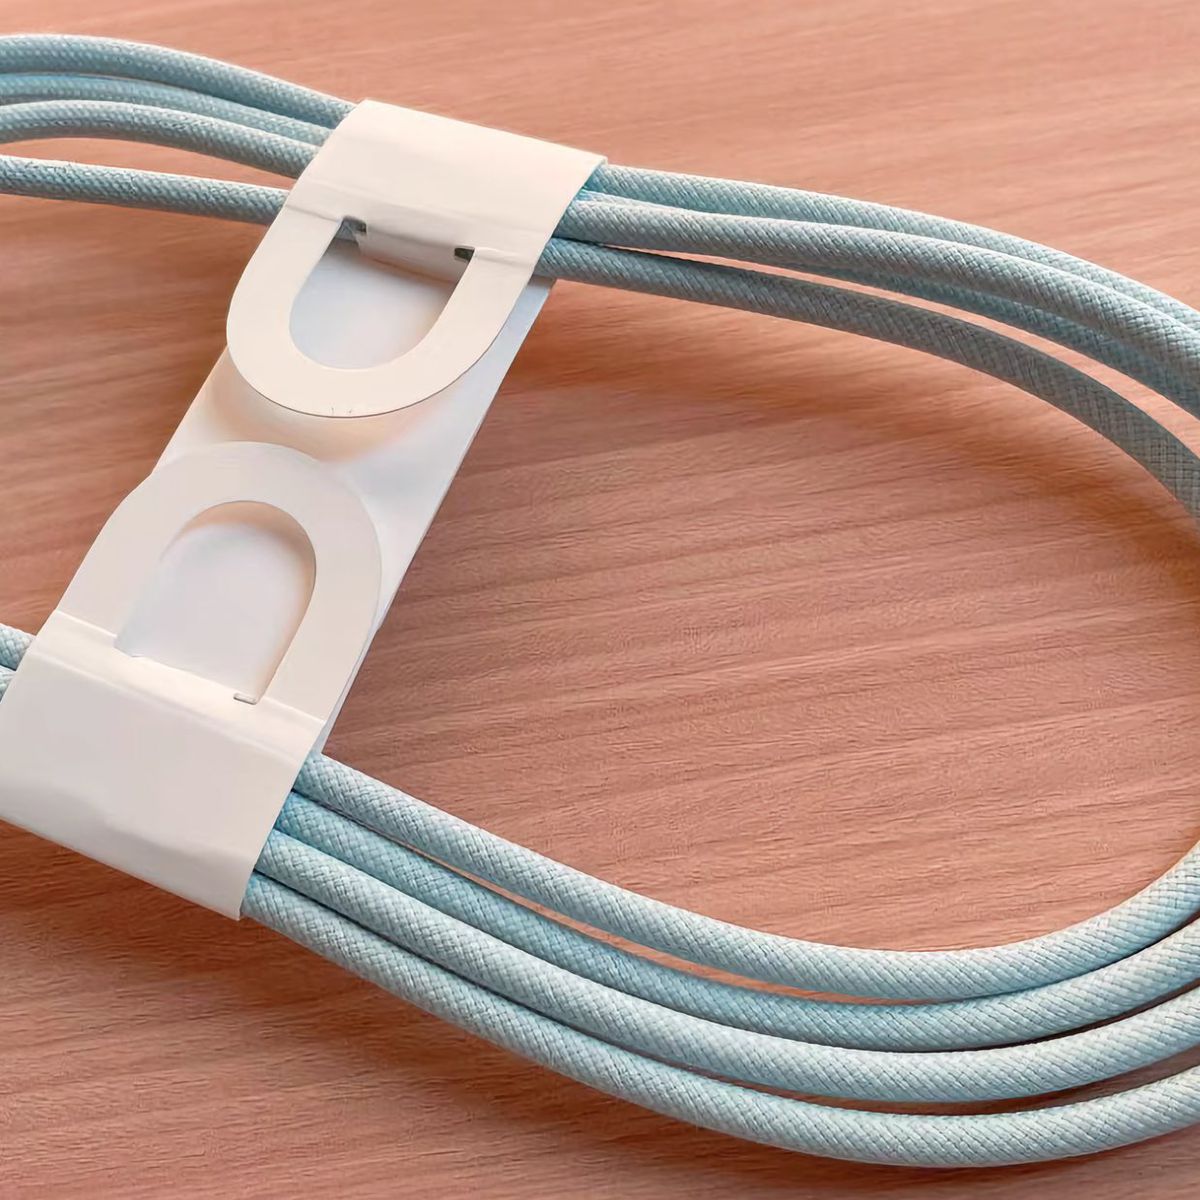 iPhone 15's Braided USB-C Cable Could Be 50% Longer - MacRumors